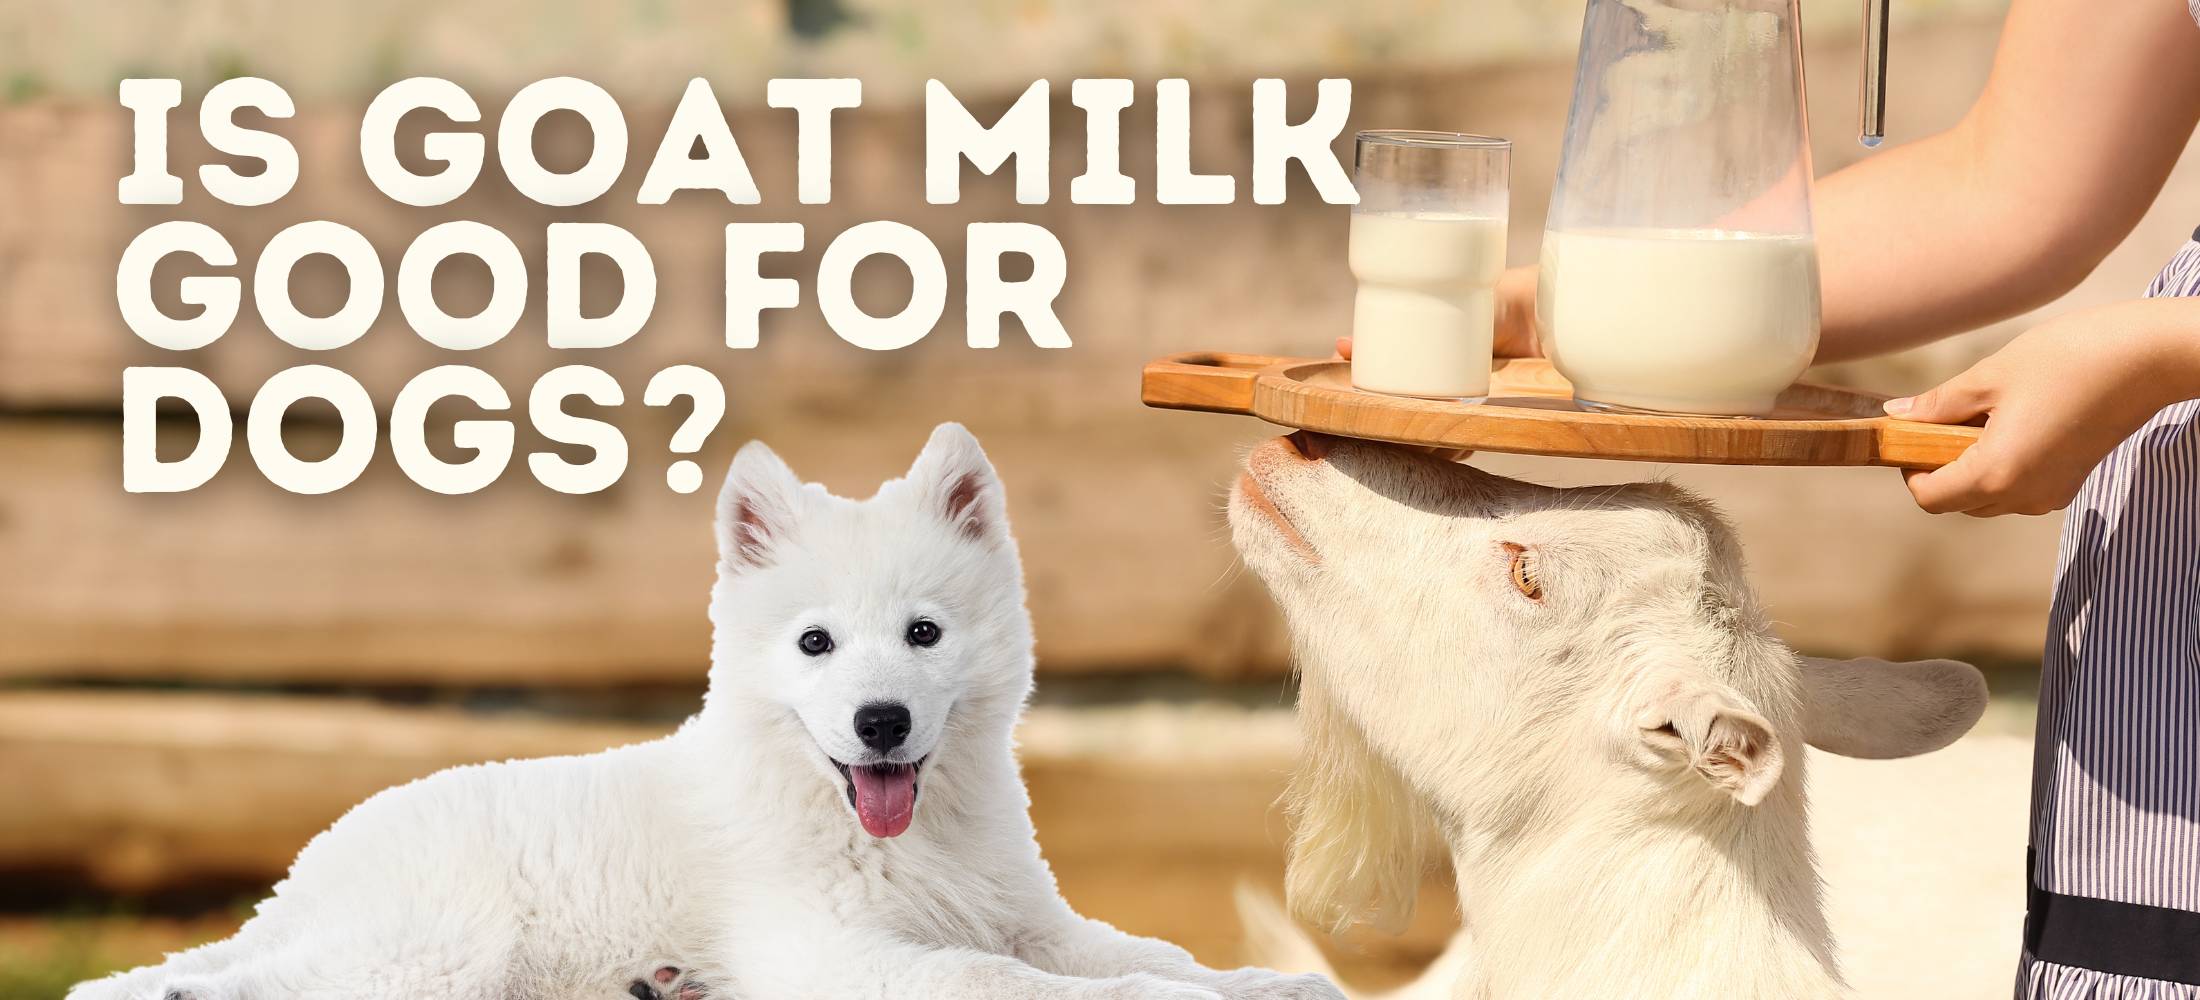 Is Goat Milk Good For Dogs? Essential Tips To Transform Your Dog's Diet